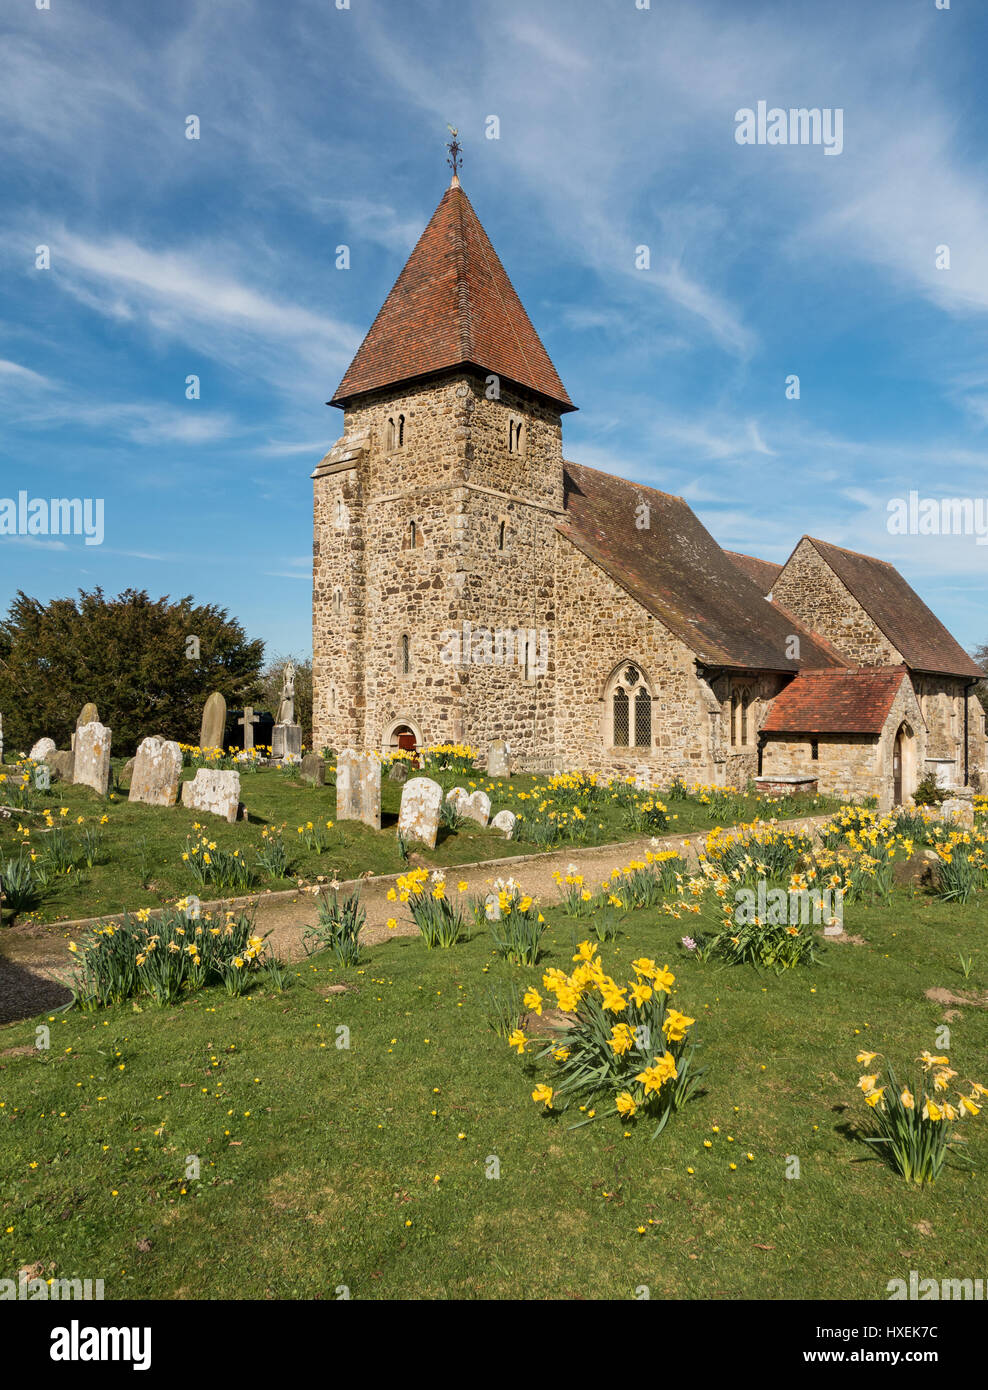 Norman church in a Quintessential English setting Stock Photo